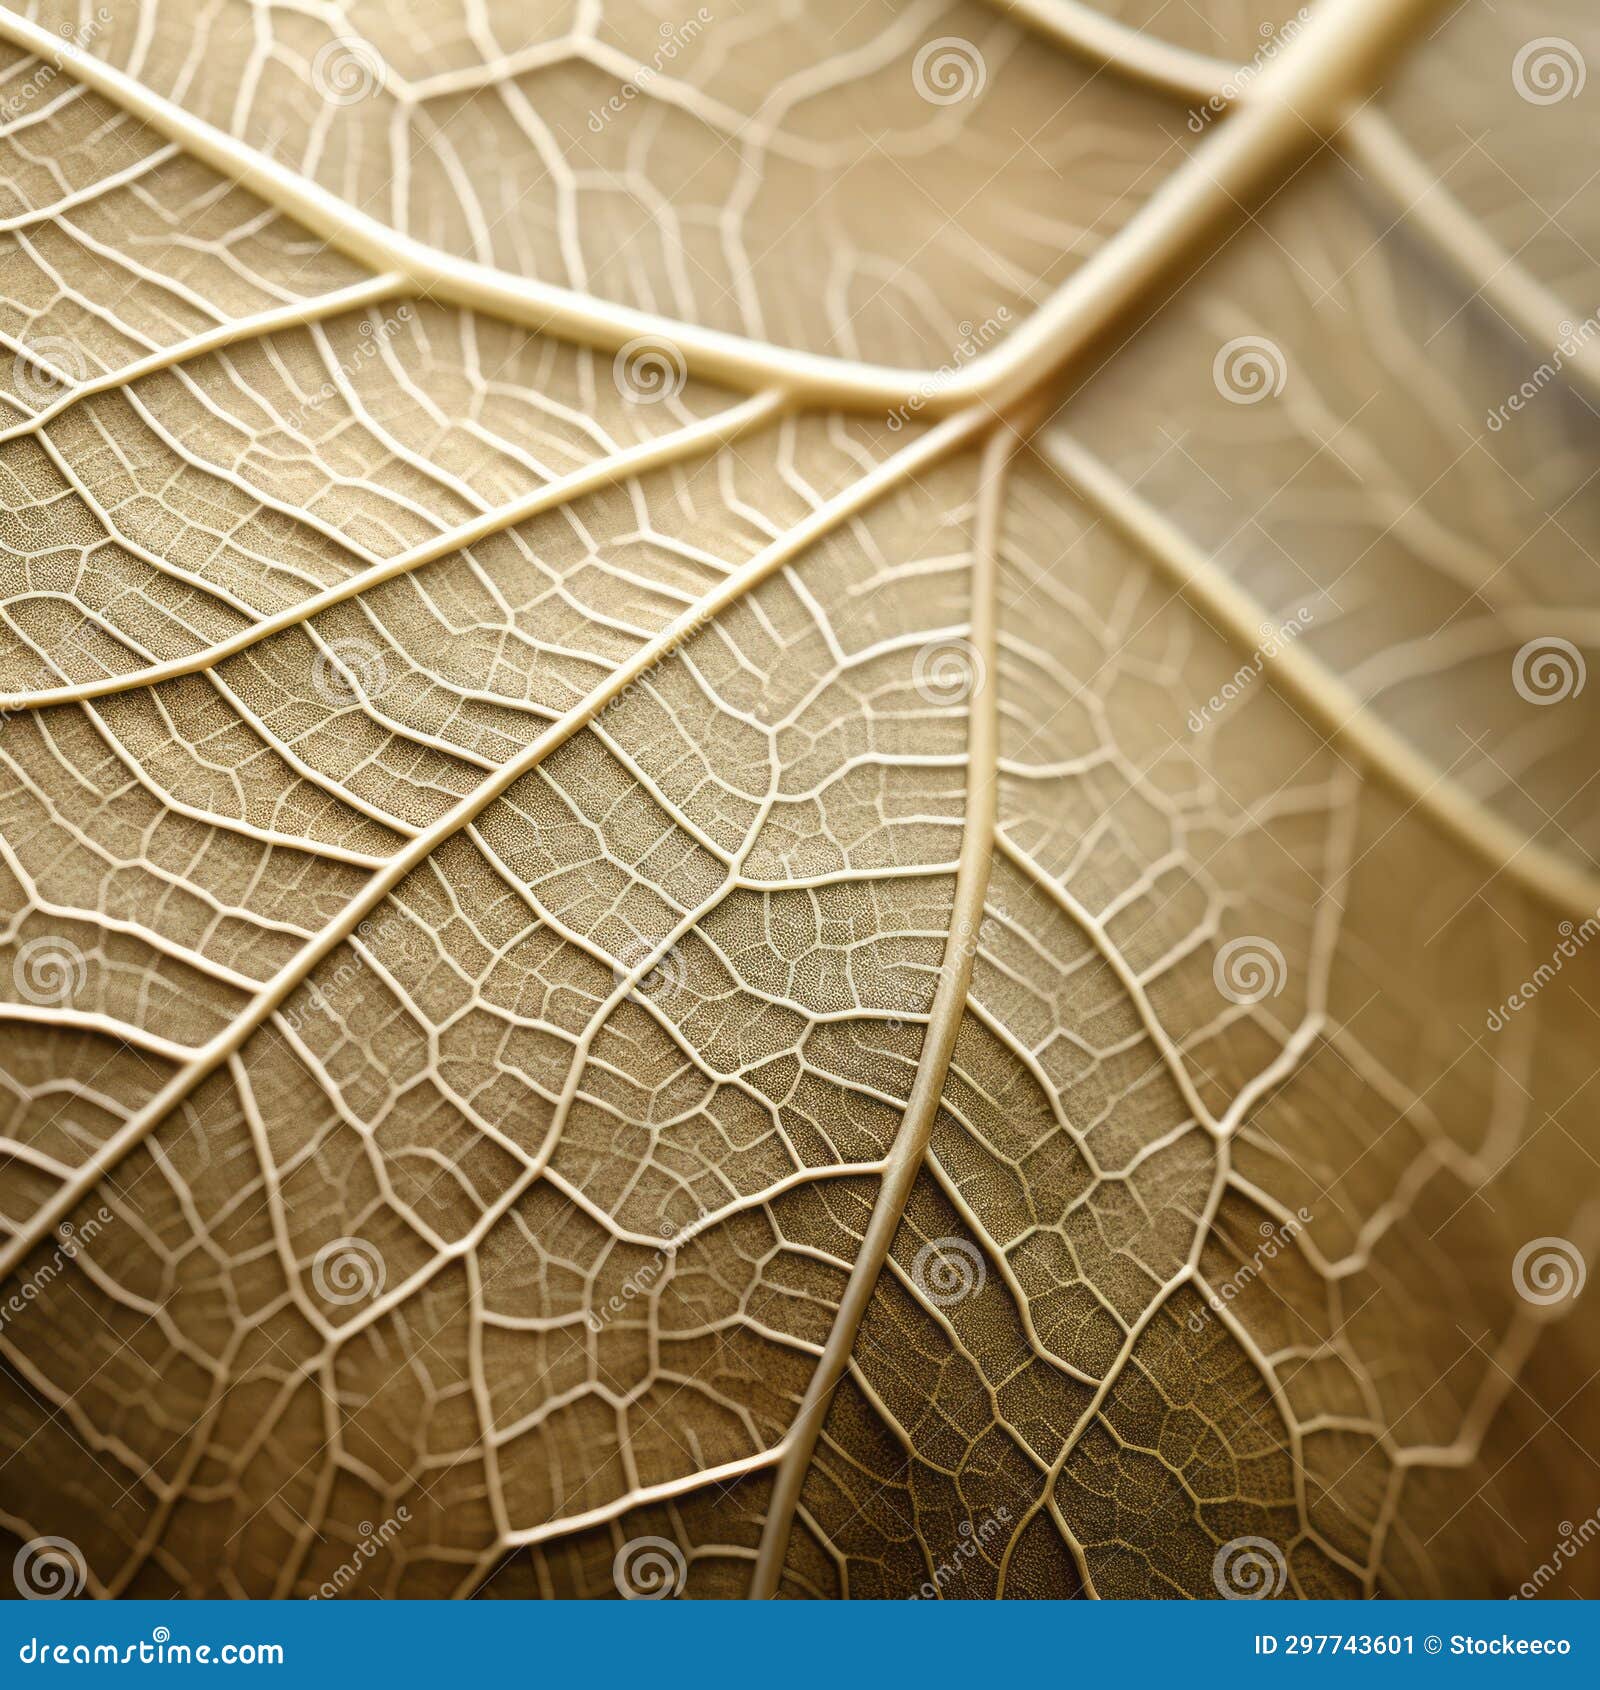 golden toned fig leaves: a delicate and intricate close-up